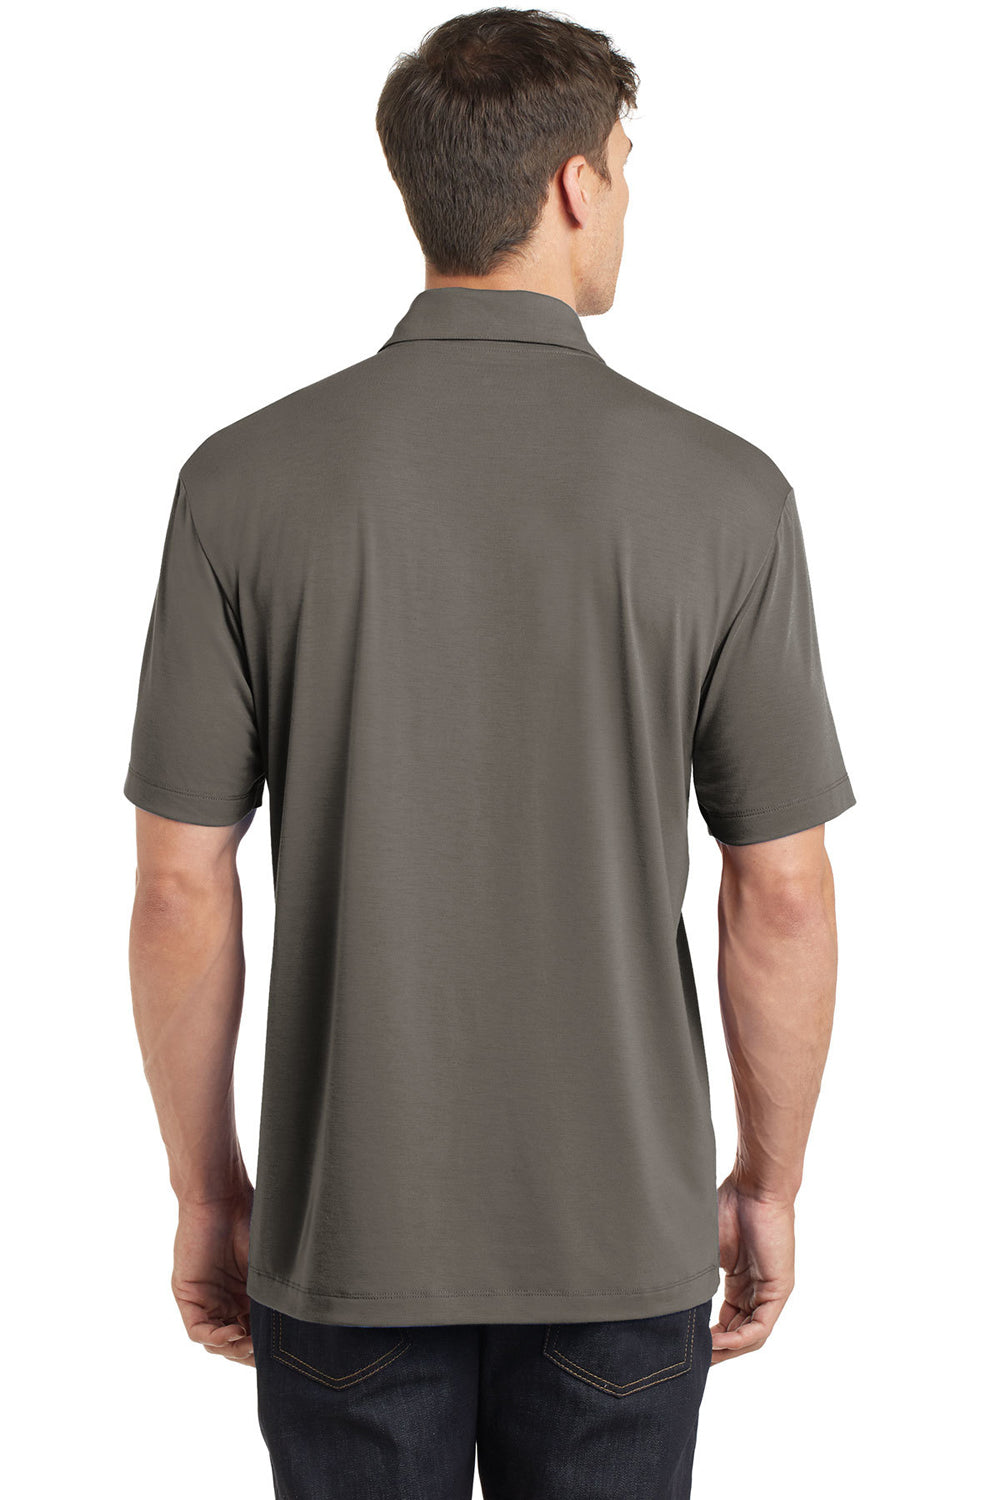 Port Authority K568 Mens Cotton Touch Performance Moisture Wicking Short Sleeve Polo Shirt Smoke Grey Back